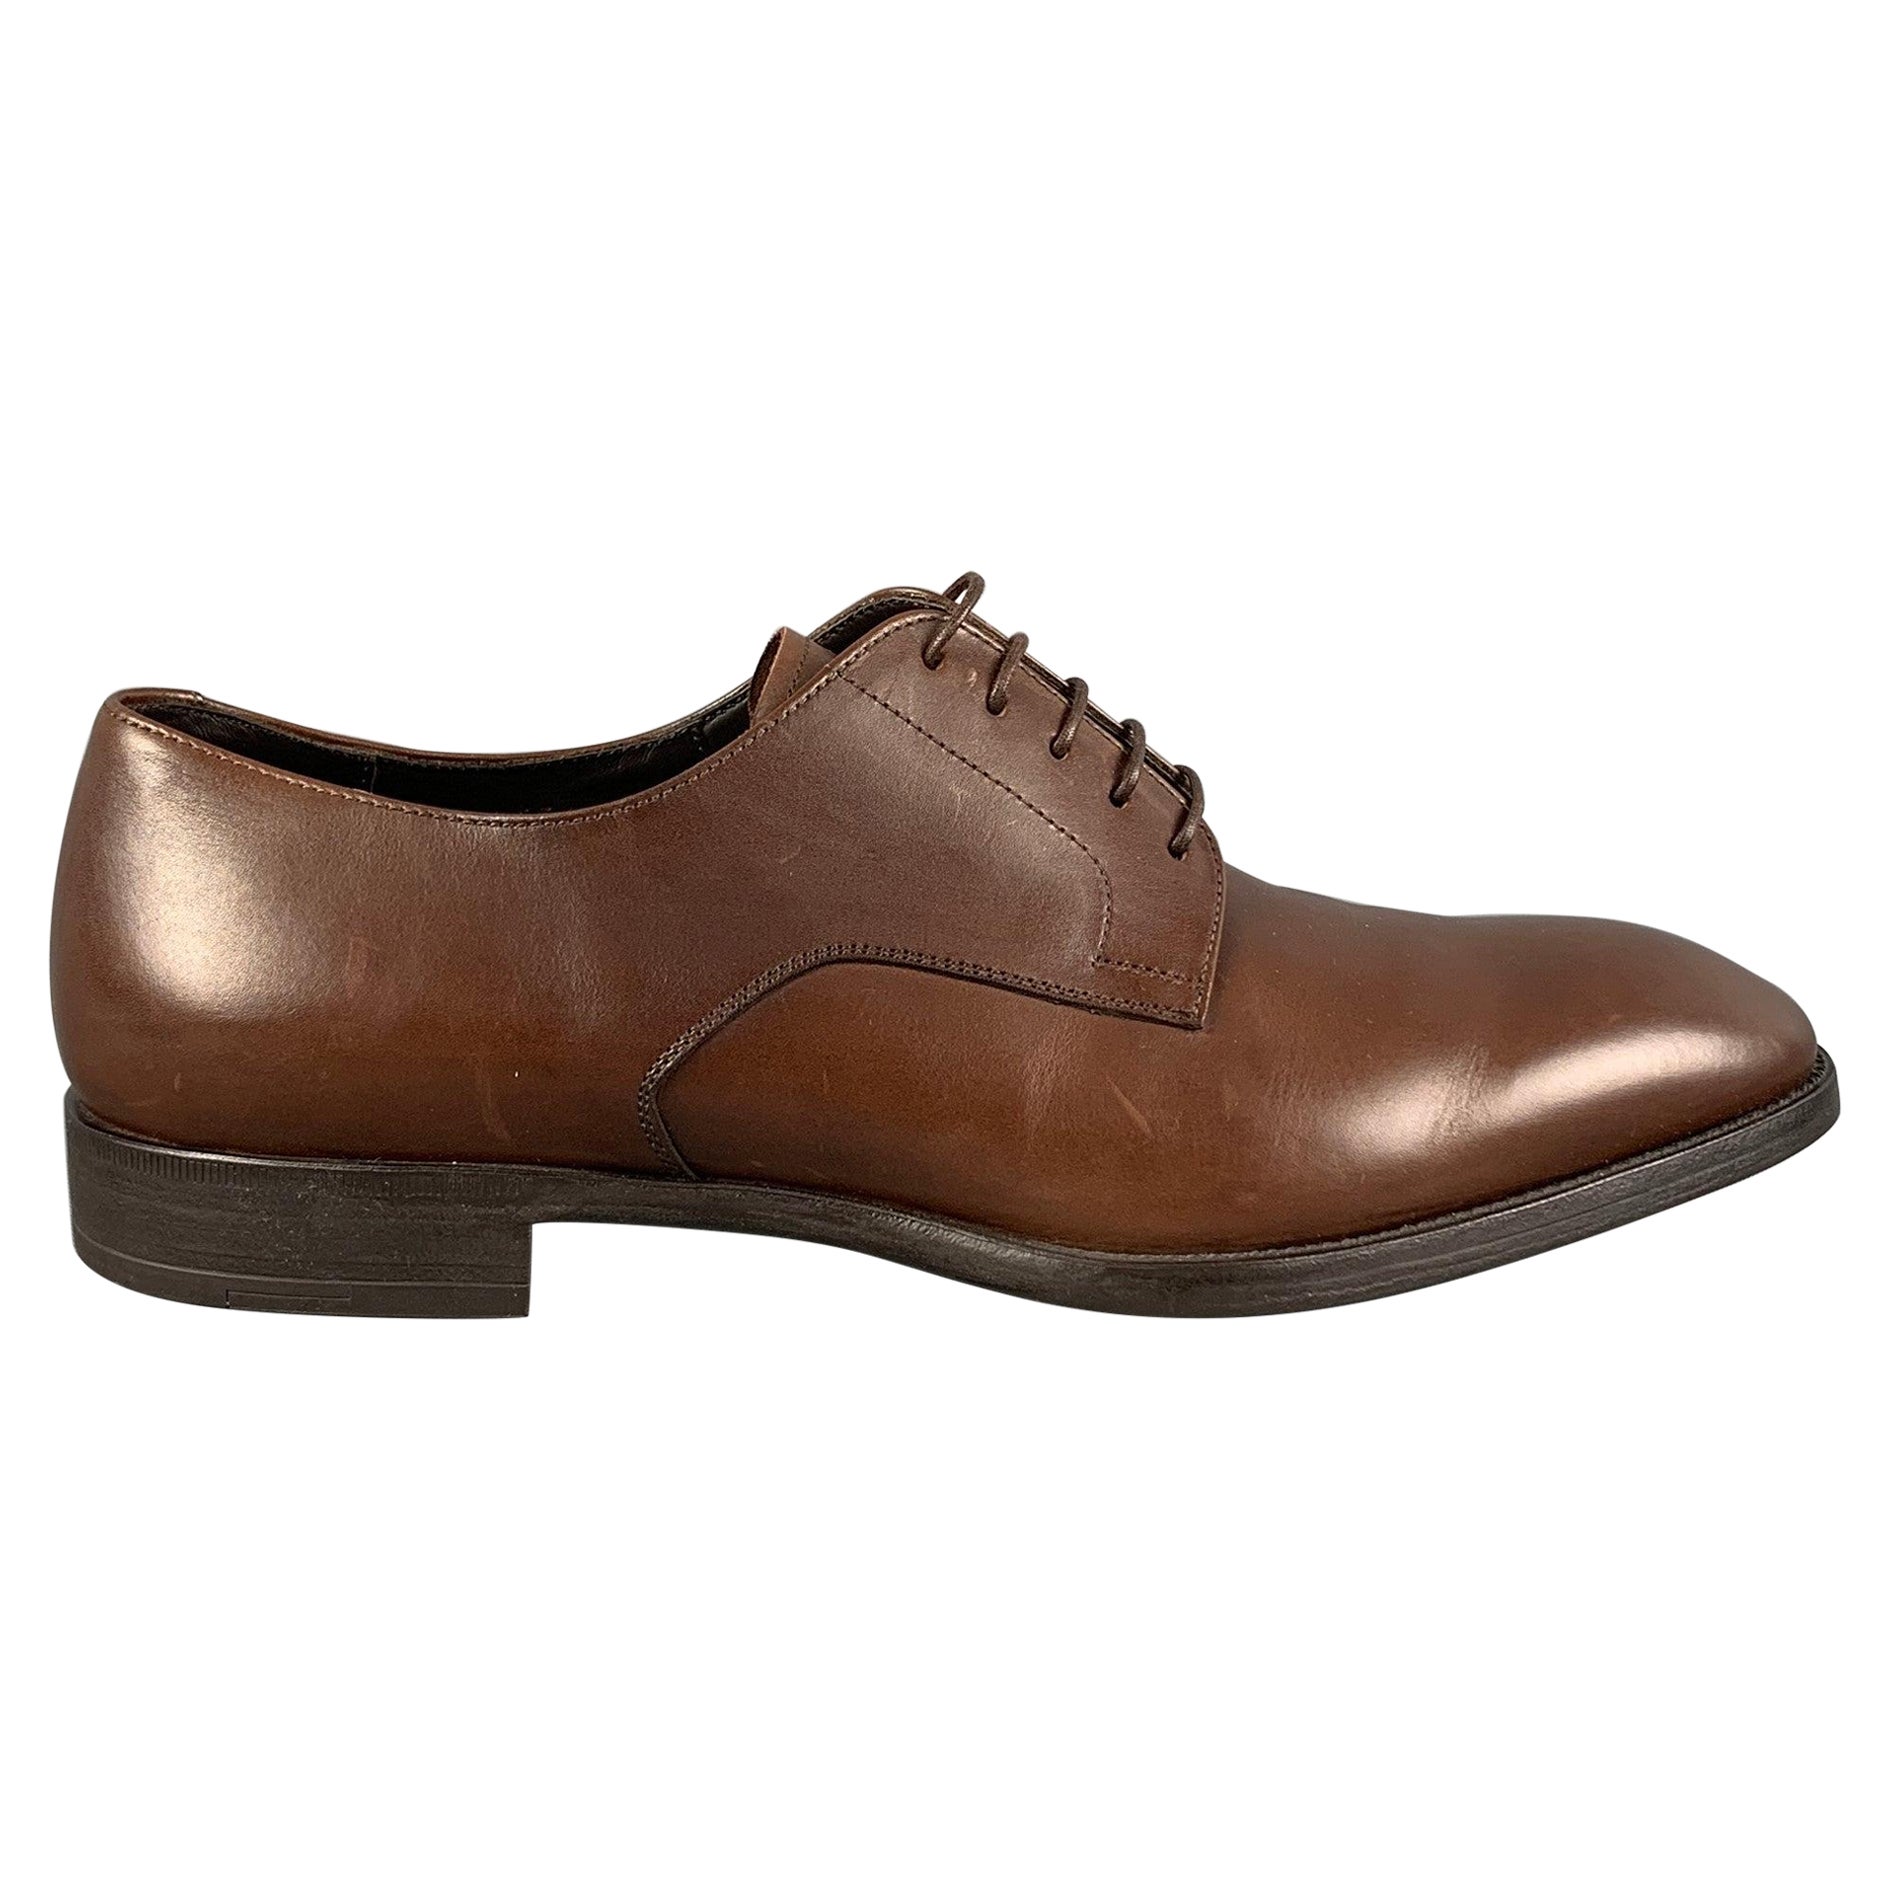 GIORGIO ARMANI Size 10 Brown Leather Lace Up Shoes For Sale